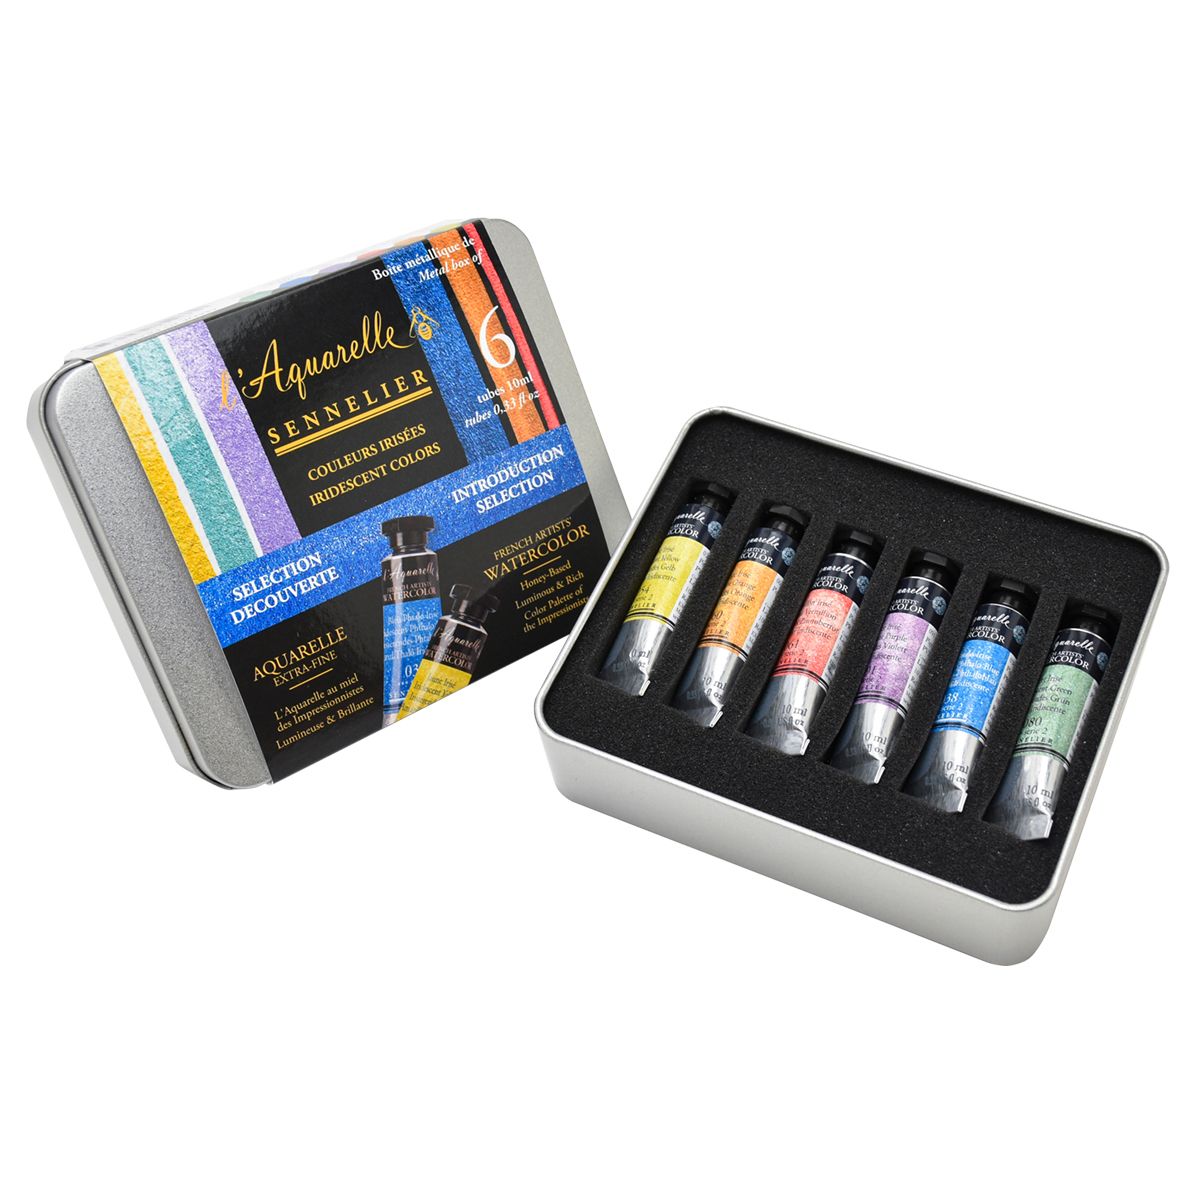 Sennelier l'Aquarelle French Artists' Watercolor Iridescent Colors Introductory Set of 6